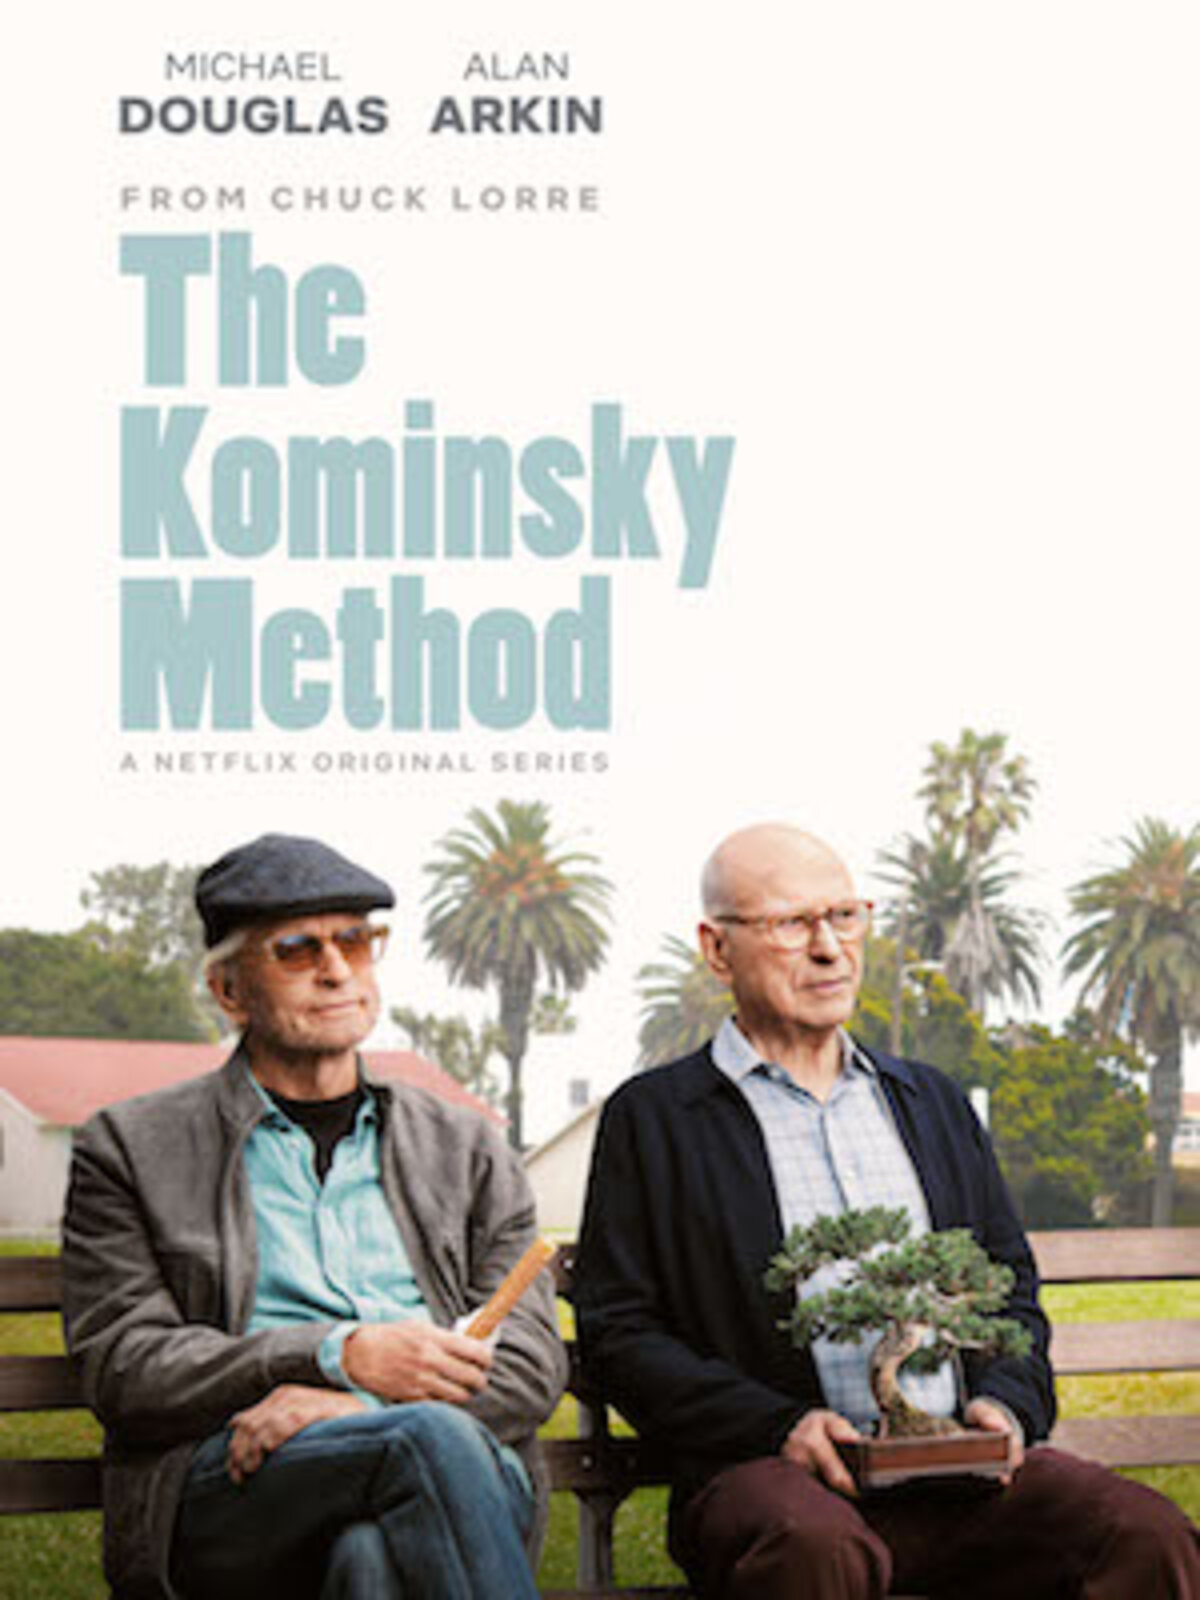 Two old men sitting on a bench for poster for The Kominsky Method